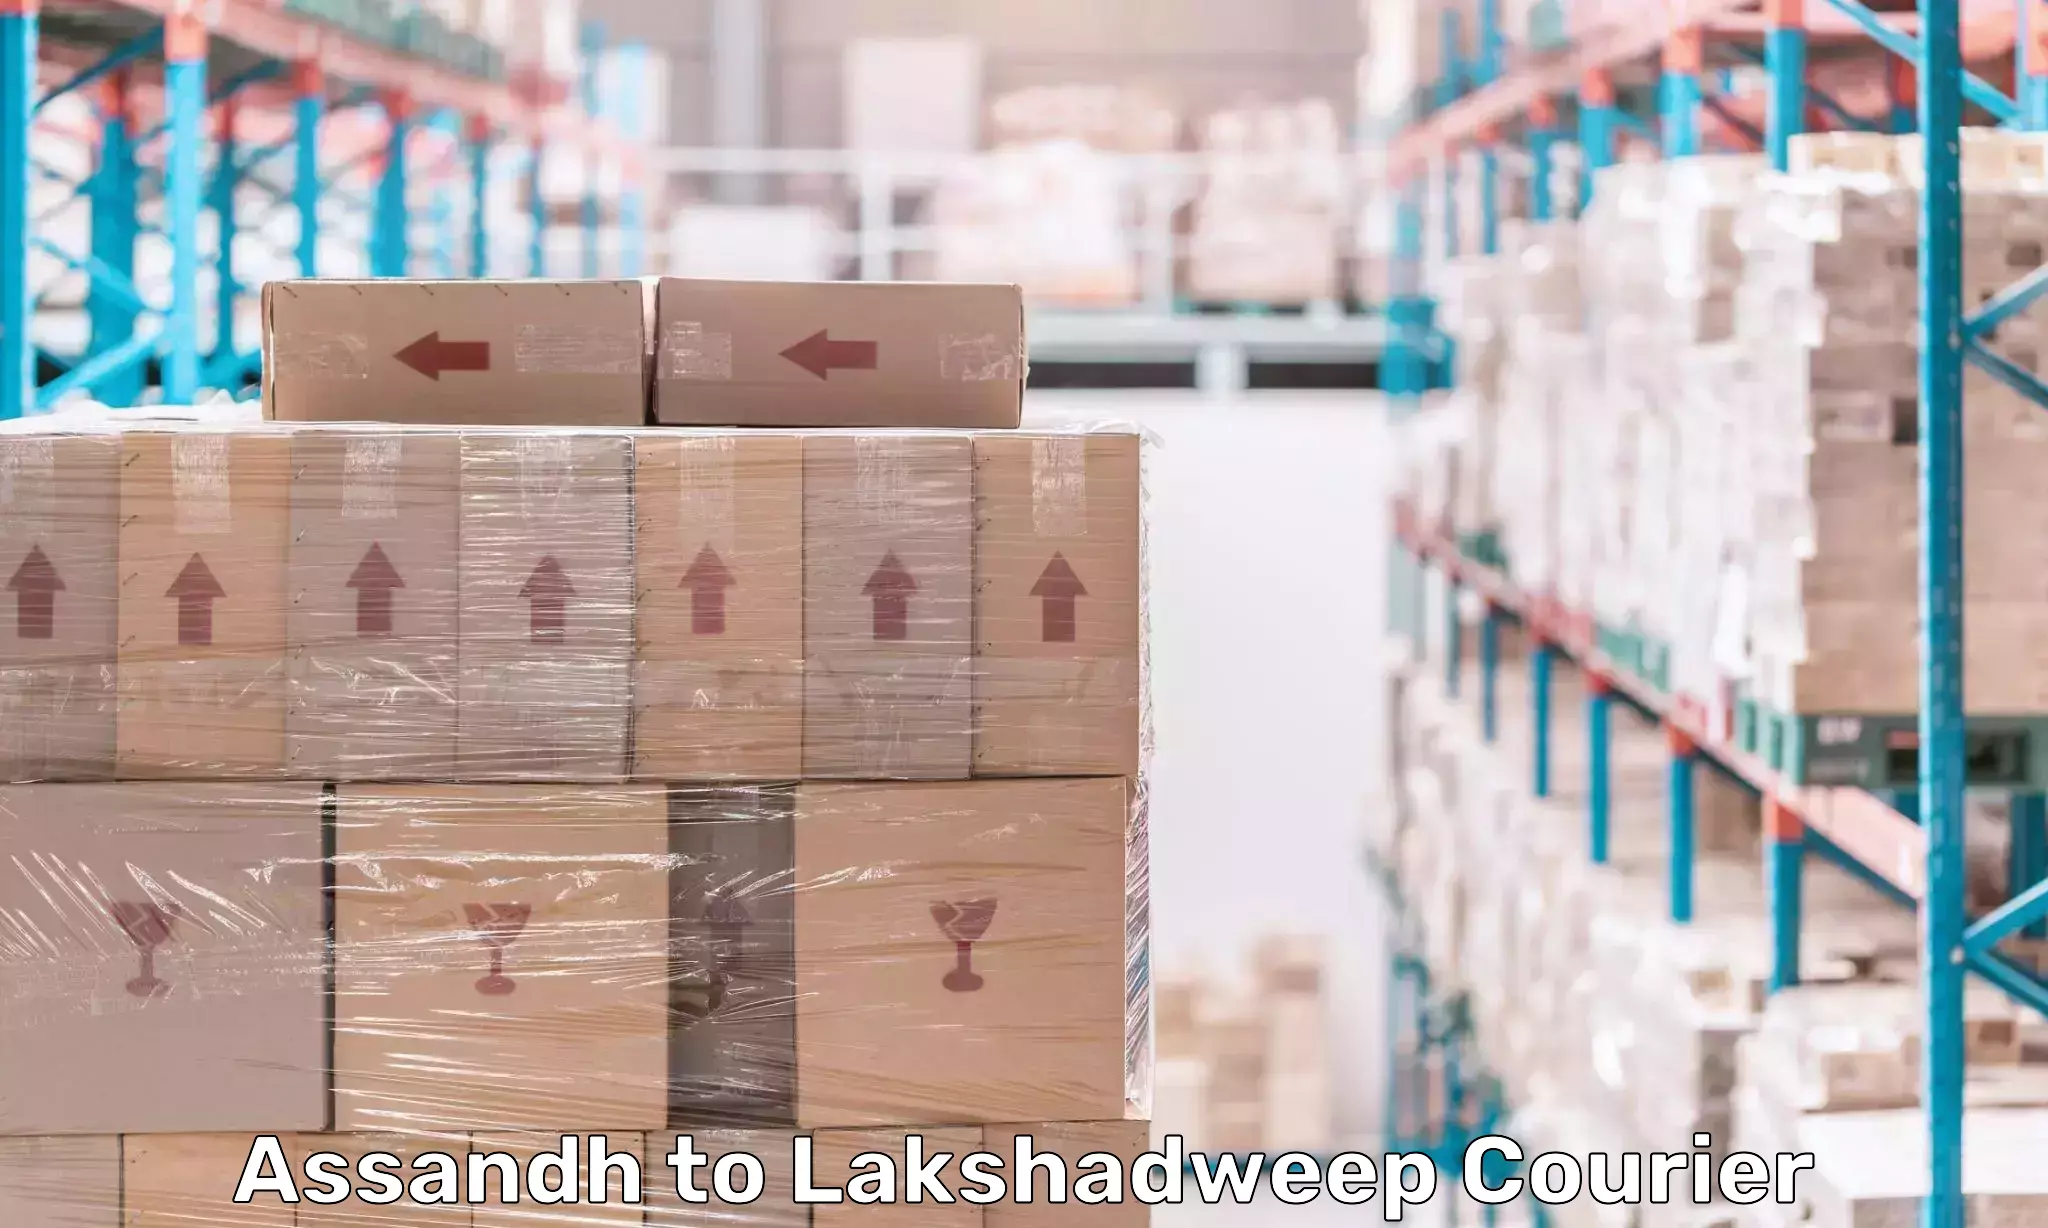 Logistics management in Assandh to Lakshadweep